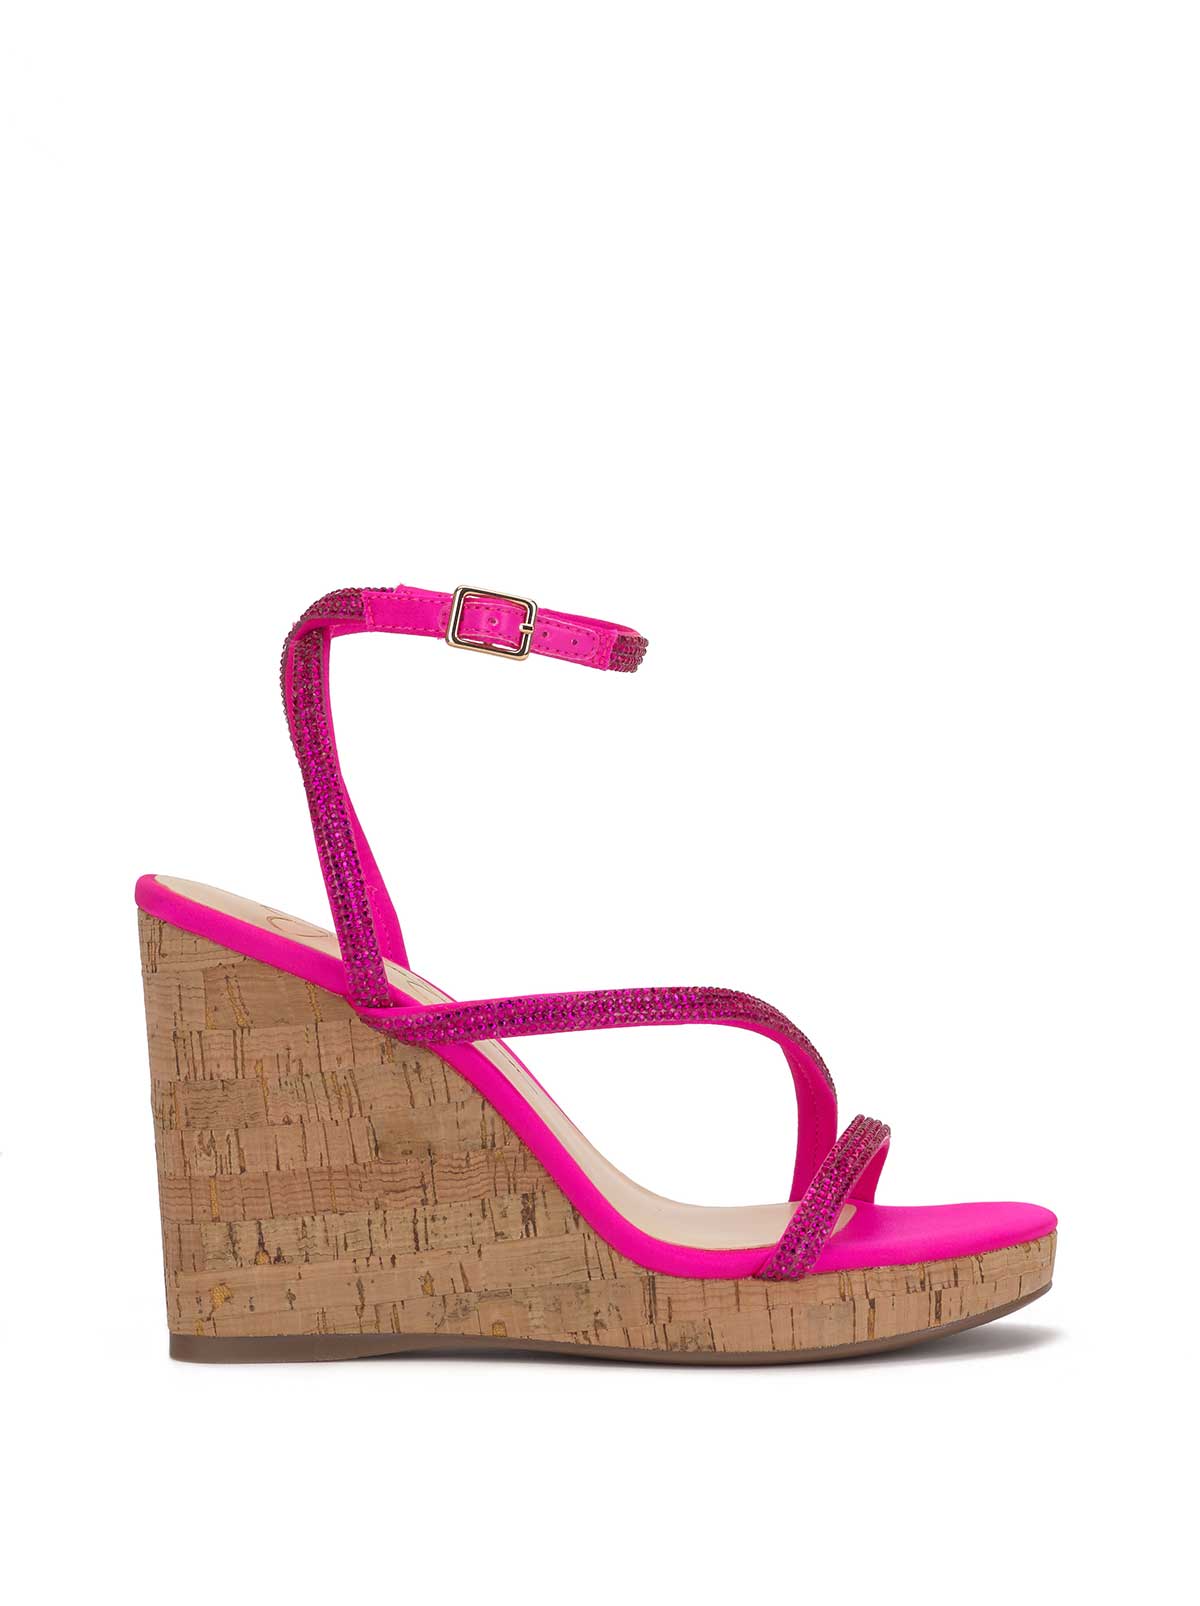 Image of Tenley Embellished Wedge in Valley Pink